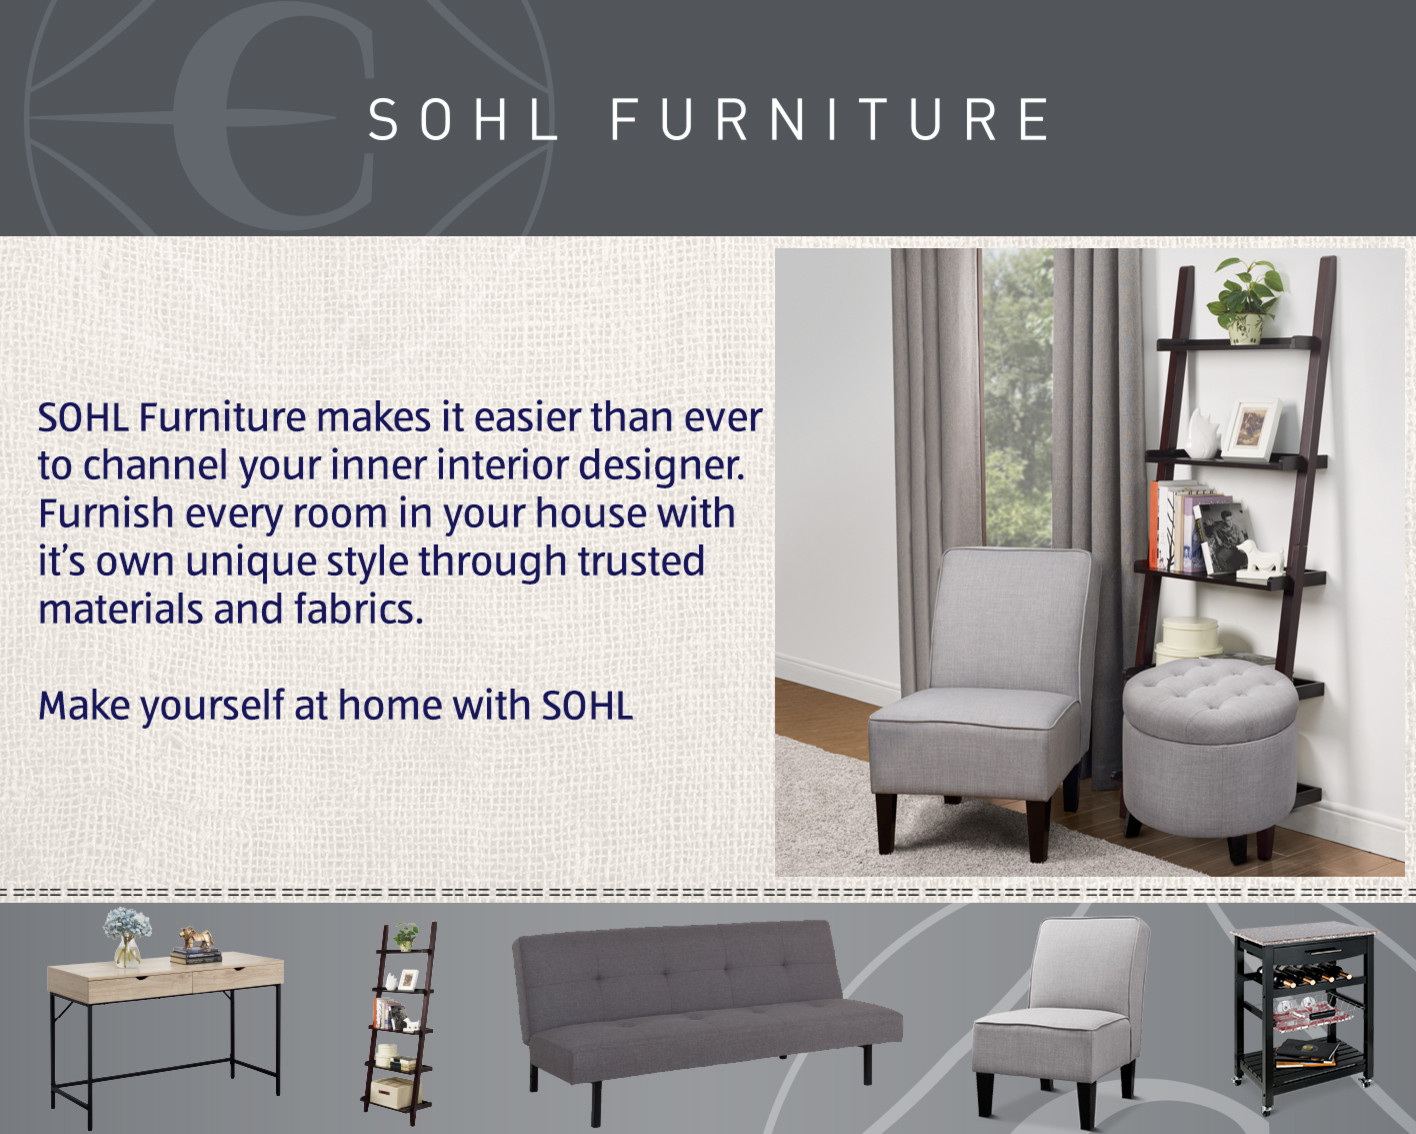 Sohl Furniture Affordable Goods For The Home Aldi Us